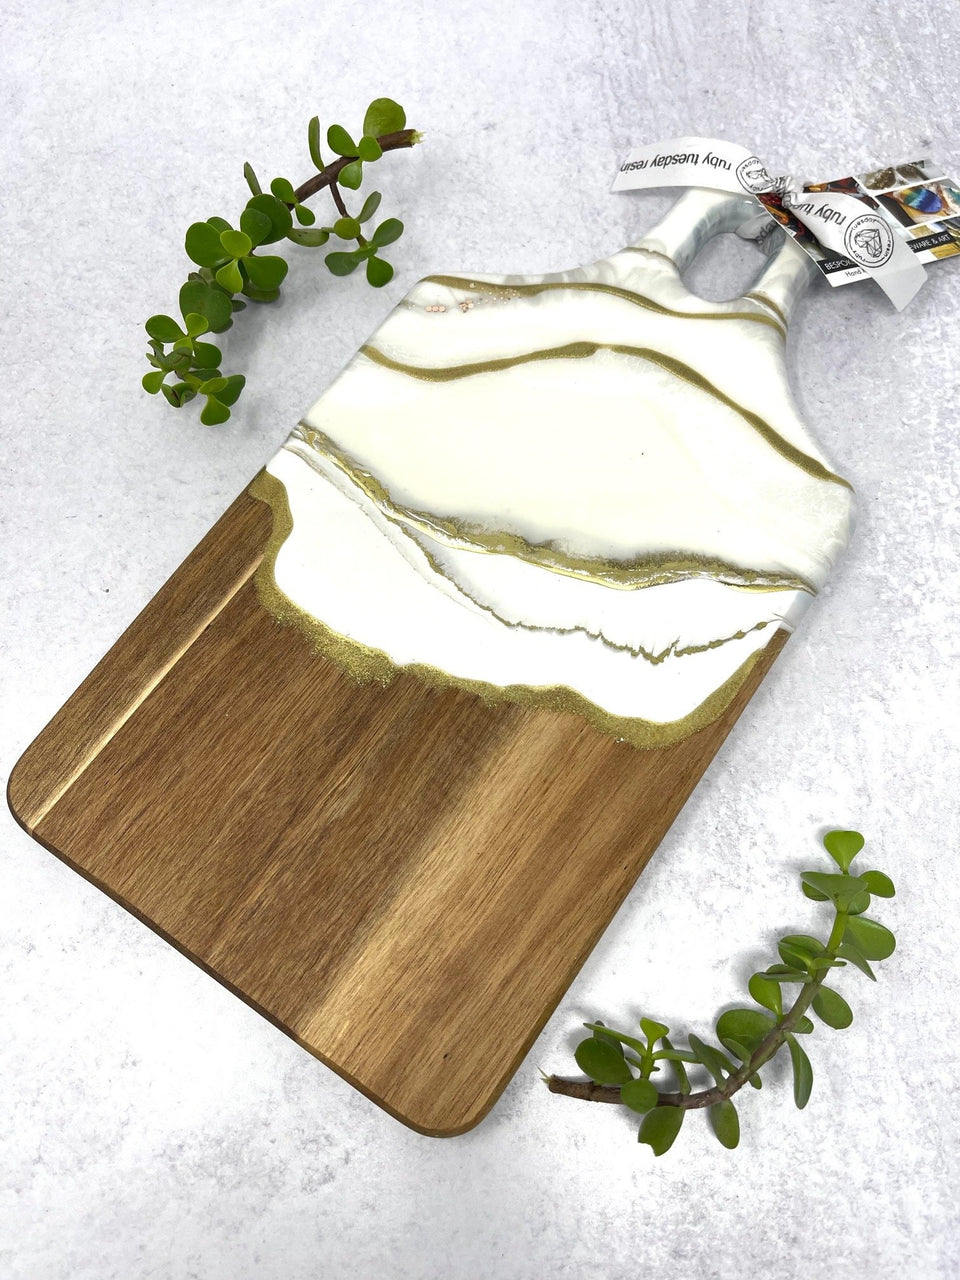 Ruby Tuesday Resin Golden Wooden Serving Boards